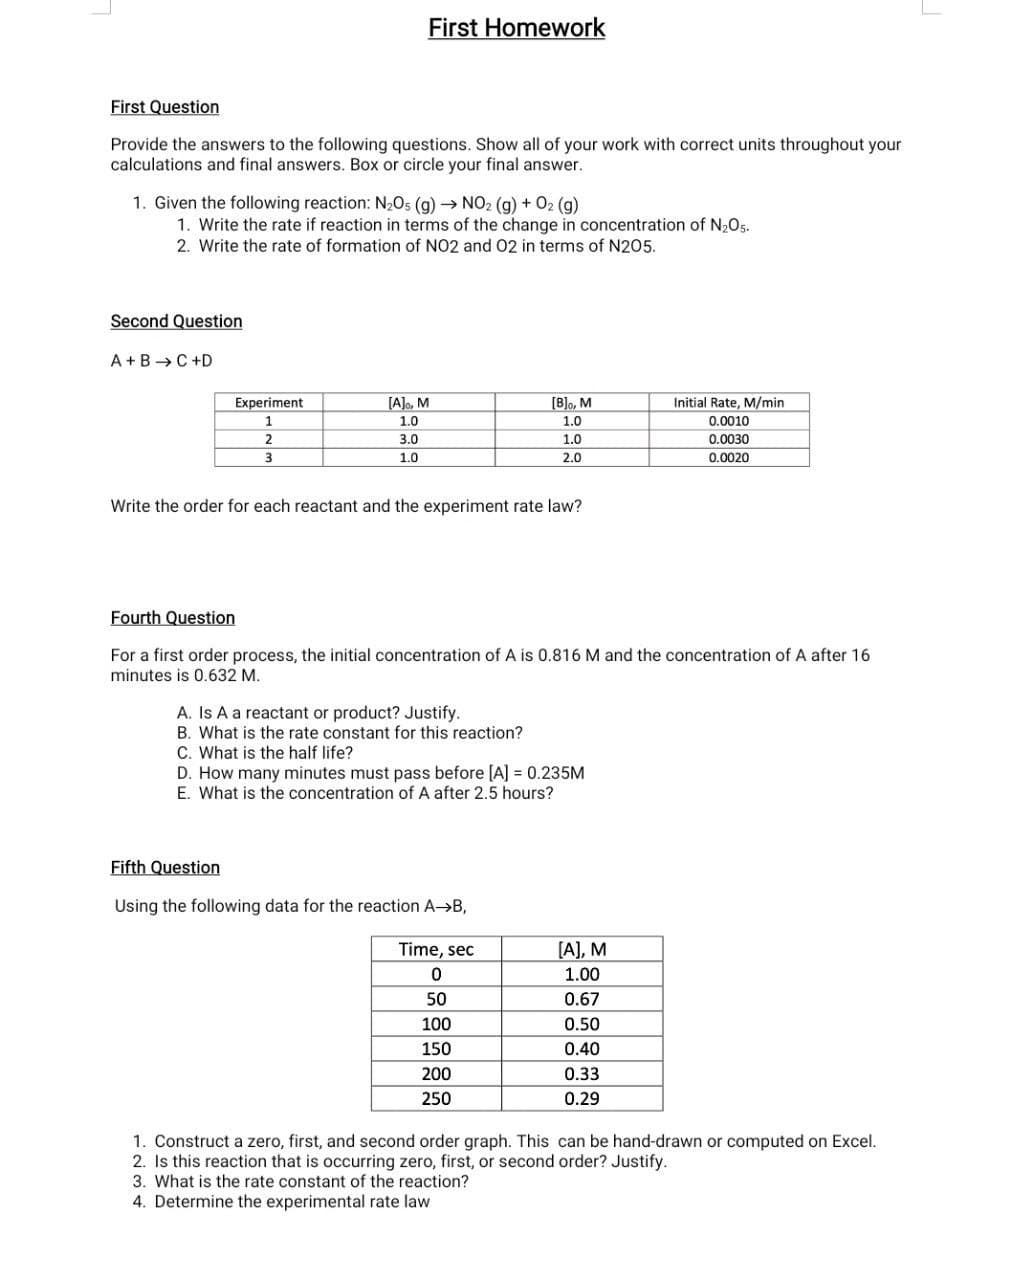 First Homework
First Question
Provide the answers to the following questions. Show all of your work with correct units throughout your
calculations and final answers. Box or circle your final answer.
1. Given the following reaction: N205 (g) → NO2 (g) + 02 (g)
1. Write the rate if reaction in terms of the change in concentration of N205.
2. Write the rate of formation of NO2 and O2 in terms of N205.
Second Question
A+B →C +D
[B]o, M
Initial Rate, M/min
0.0010
Experiment
[A]o, M
1
1.0
1.0
2
3.0
1.0
0.0030
3
1.0
2.0
0.0020
Write the order for each reactant and the experiment rate law?
Fourth Question
For a first order process, the initial concentration of A is 0.816 M and the concentration of A after 16
minutes is 0.632 M.
A. Is A a reactant or product? Justify.
B. What is the rate constant for this reaction?
C. What is the half life?
D. How many minutes must pass before [A] = 0.235M
E. What is the concentration of A after 2.5 hours?
Fifth Question
Using the following data for the reaction A->B,
Time, sec
[A], M
1.00
50
0.67
100
0.50
150
0.40
200
0.33
250
0.29
1. Construct a zero, first, and second order graph. This can be hand-drawn or computed on Excel.
2. Is this reaction that is occurring zero, first, or second order? Justify.
3. What is the rate constant of the reaction?
4. Determine the experimental rate law
